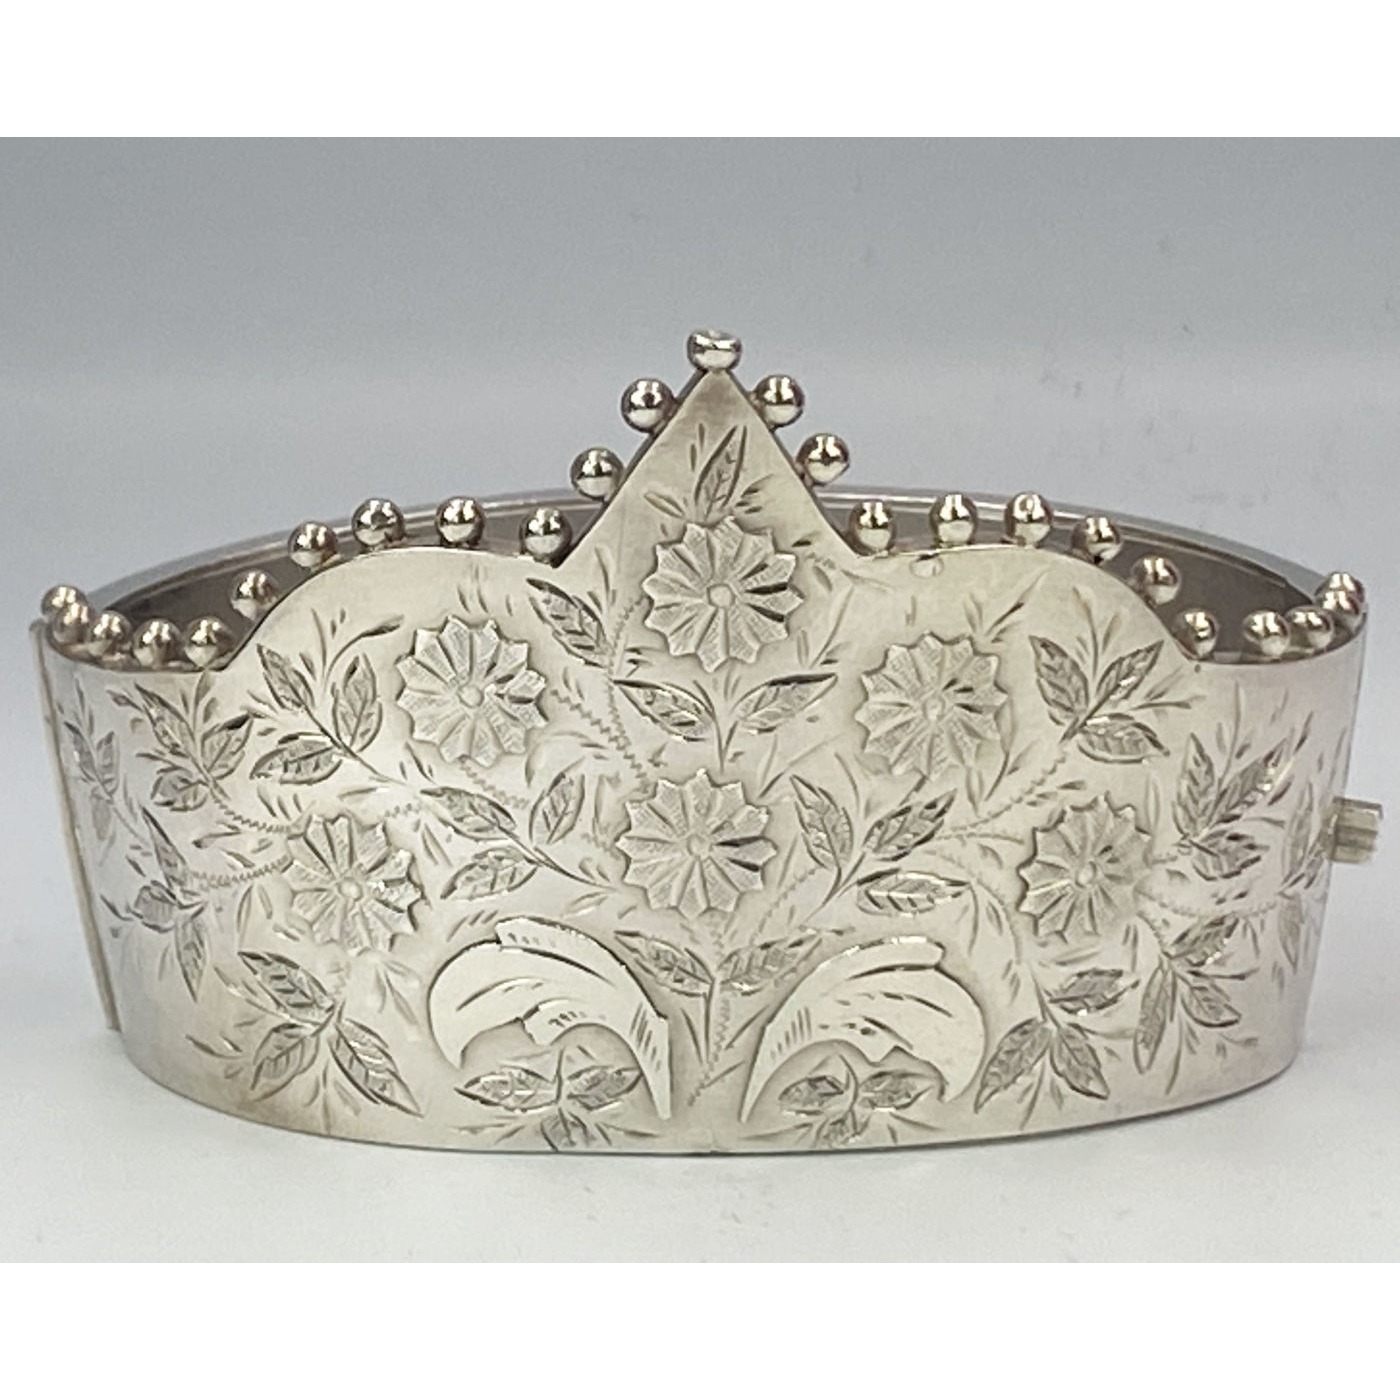 Rare Crown Shaped, Applied Flowers, English Silver Bangle March 17, 1885